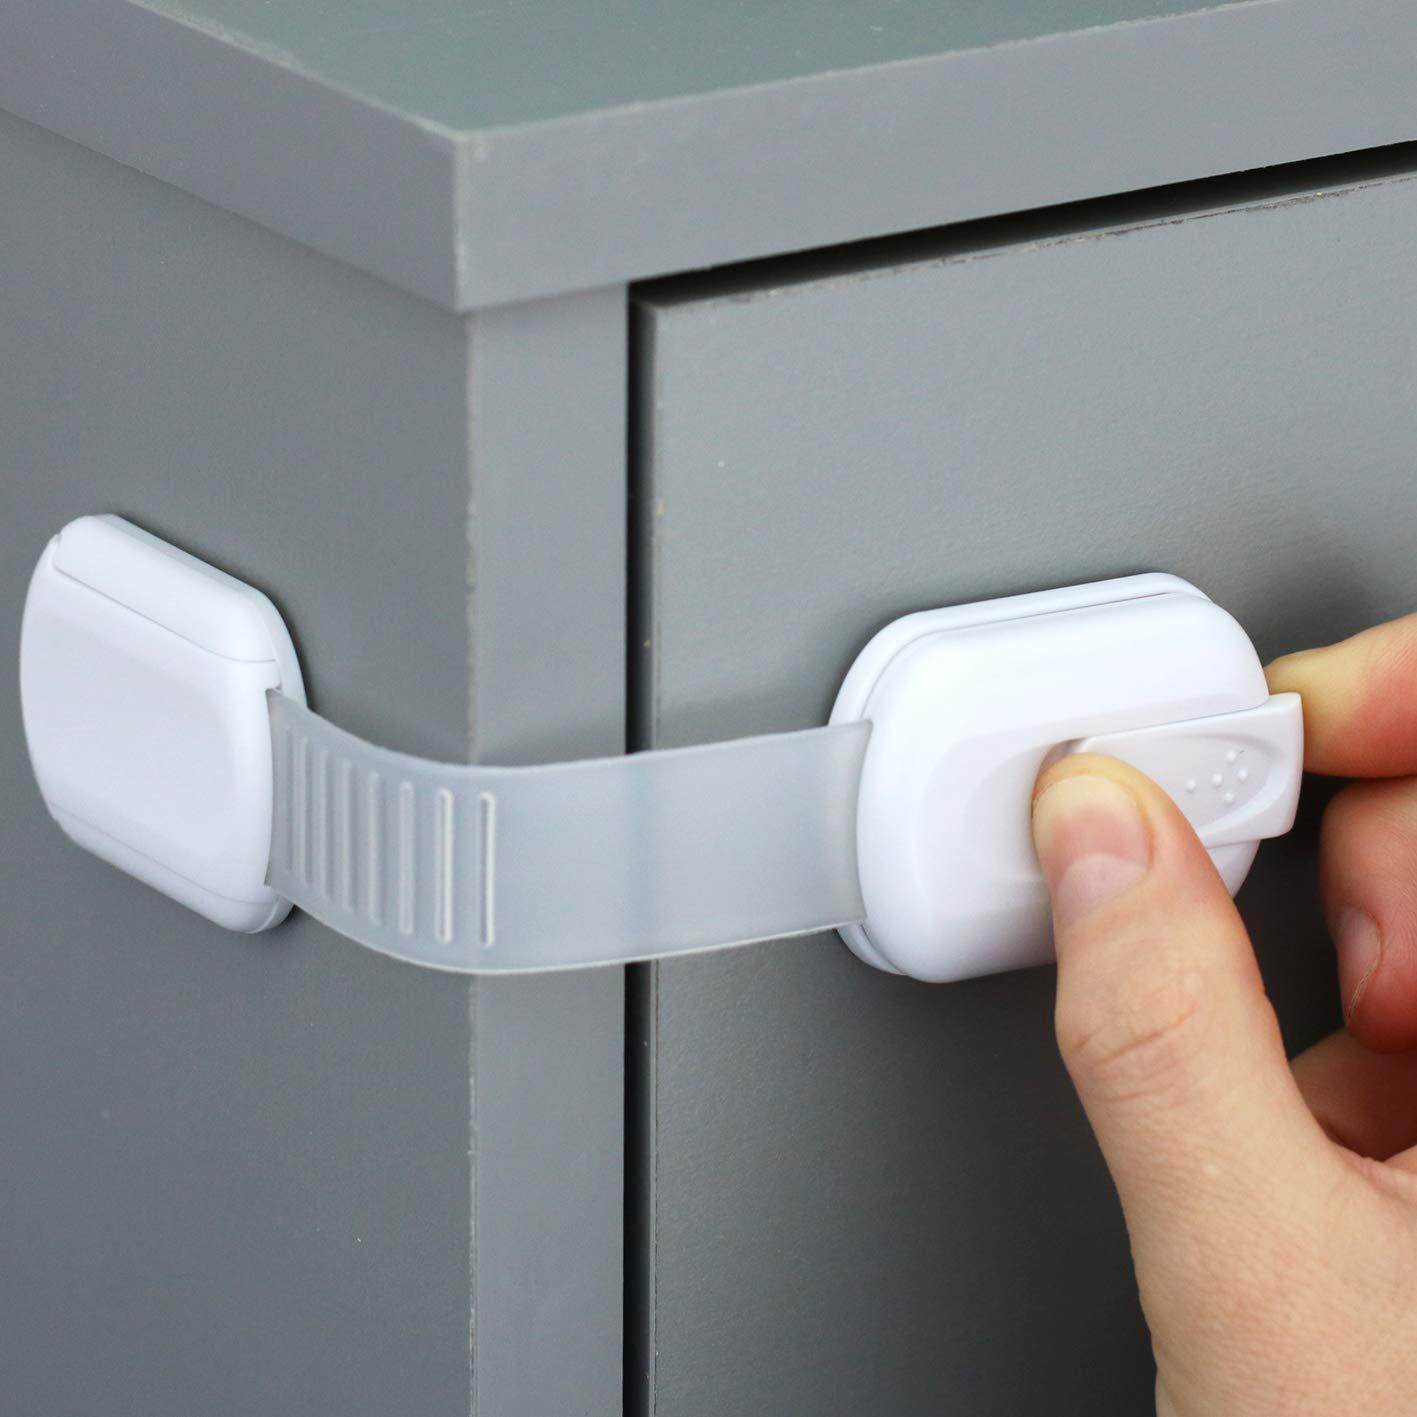 InfantLY Bright 5 pcs child safety strap locks, adhesive baby-proof cabinet  latches childproof drawer latche adjustable security closet locks